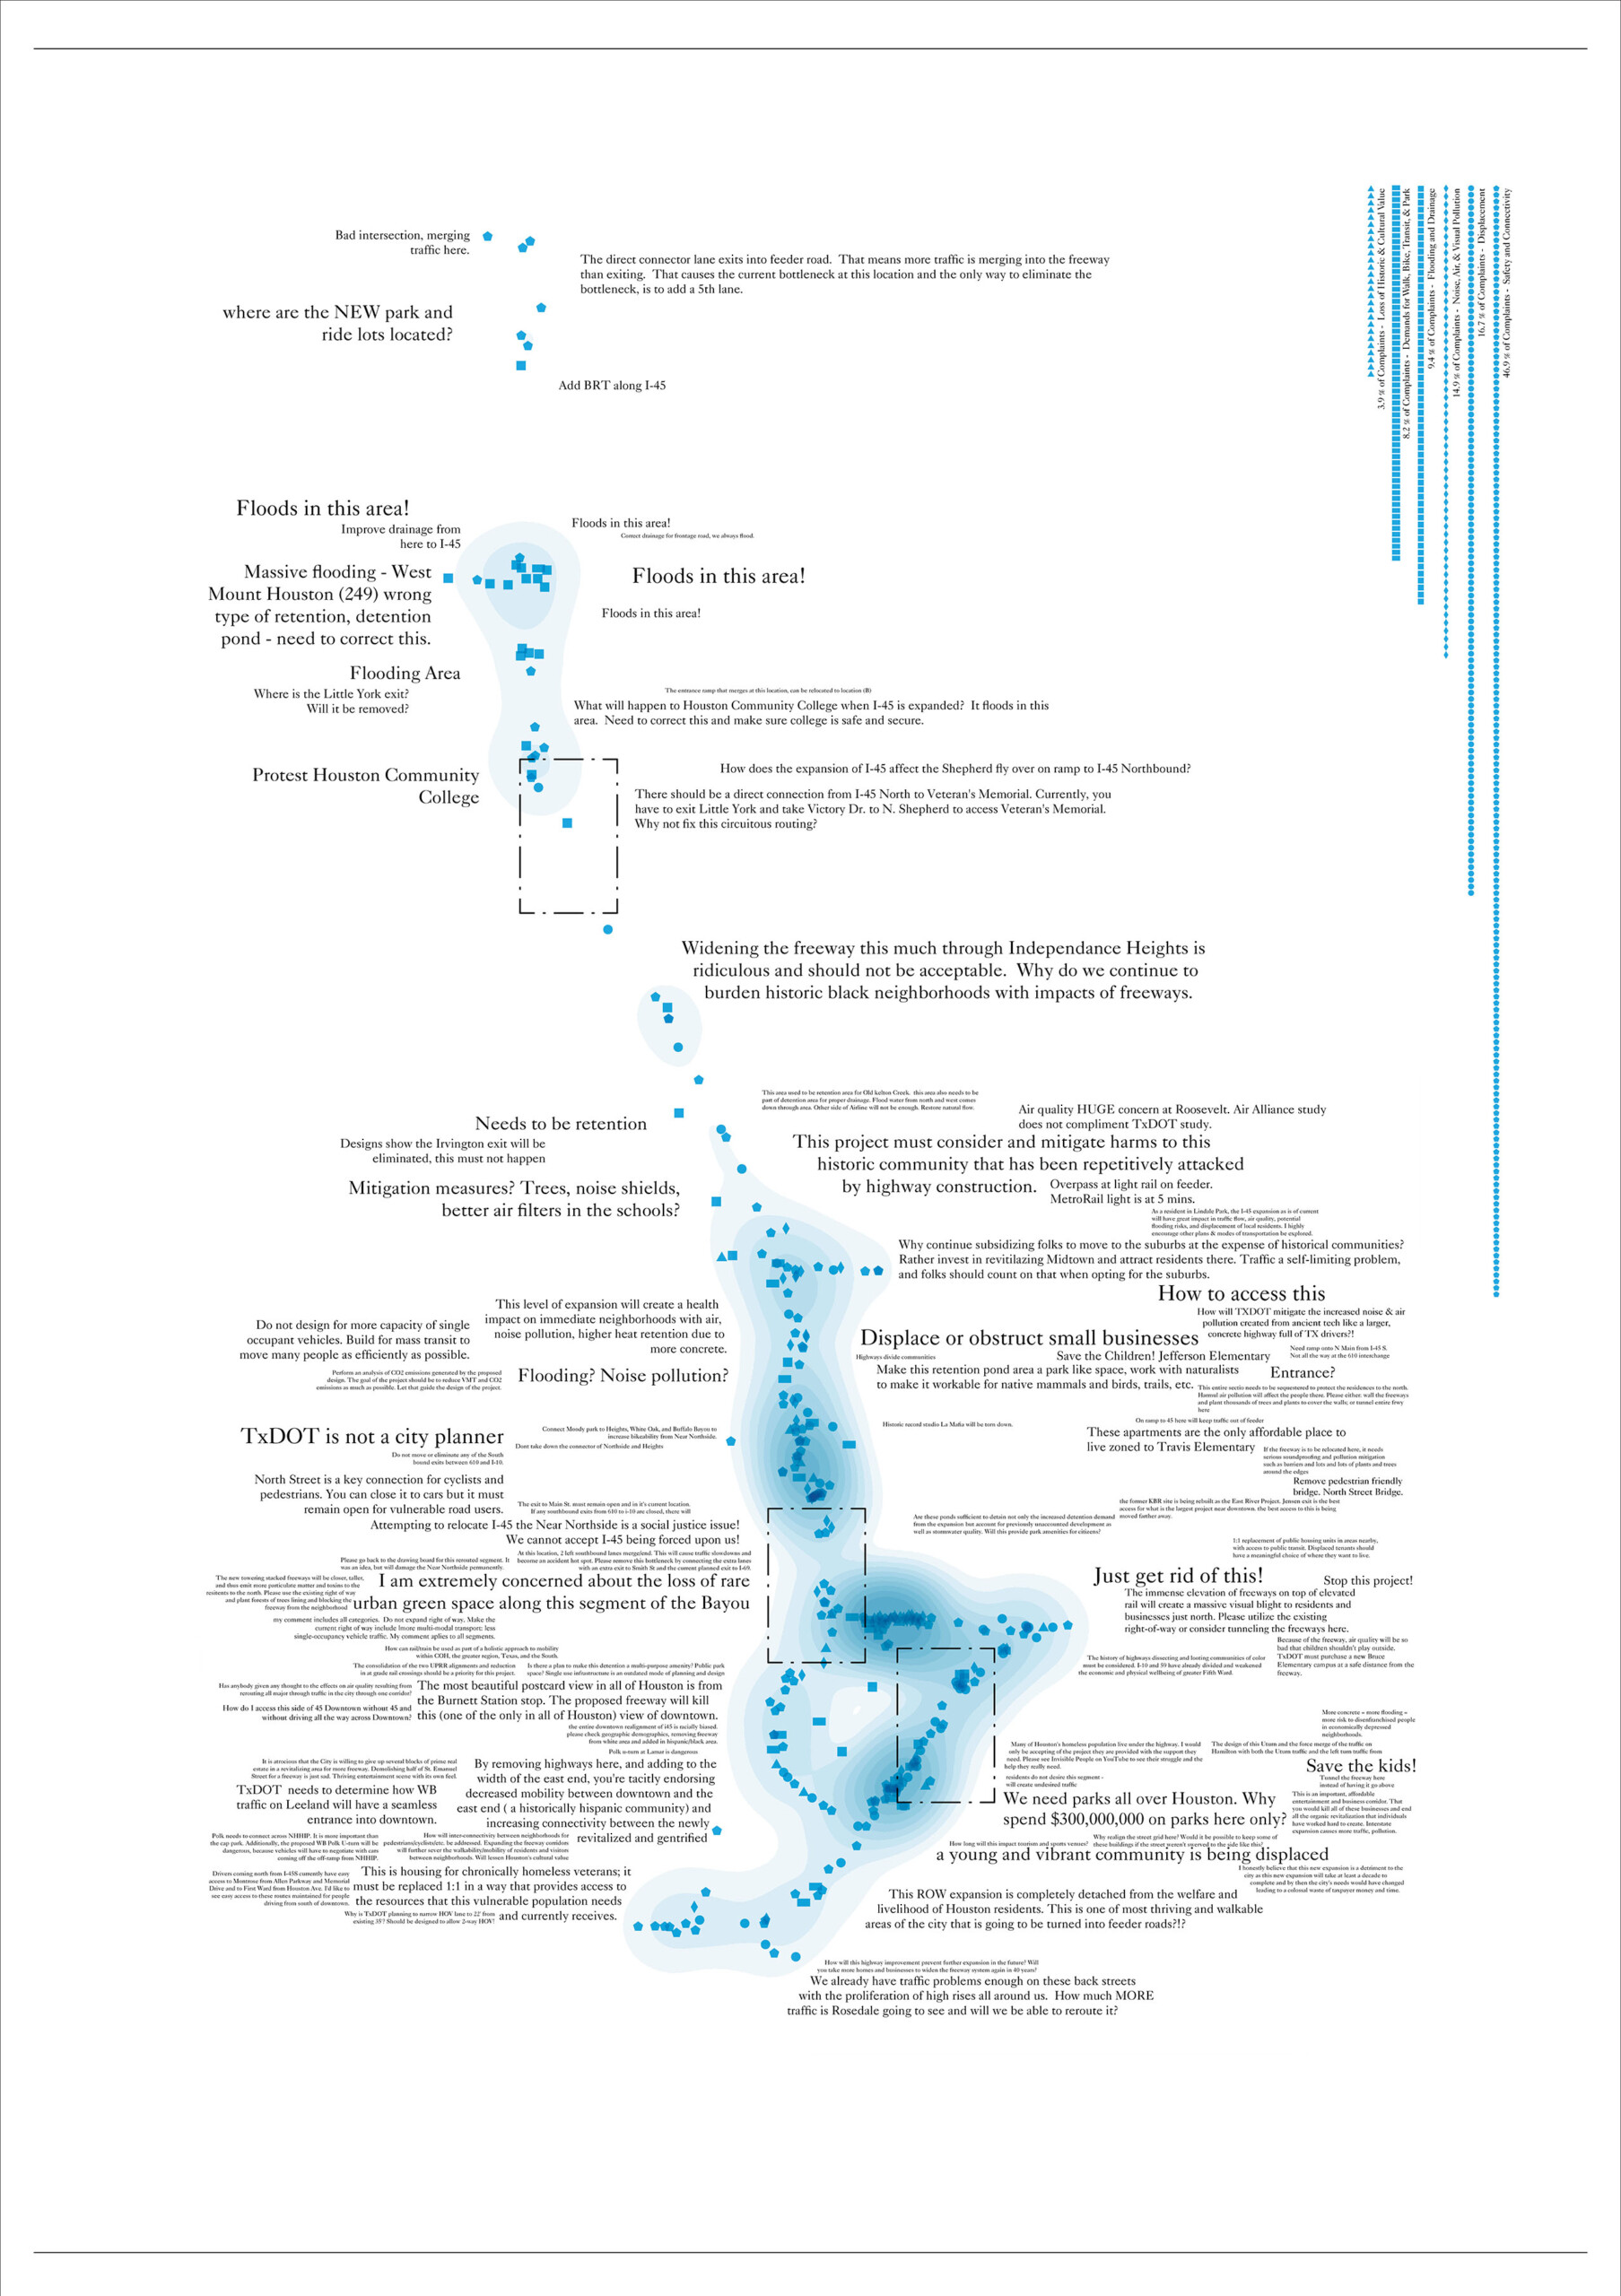 Abstract diagram mapping the complaints of Houston residents around the issue and consequences of flooding.